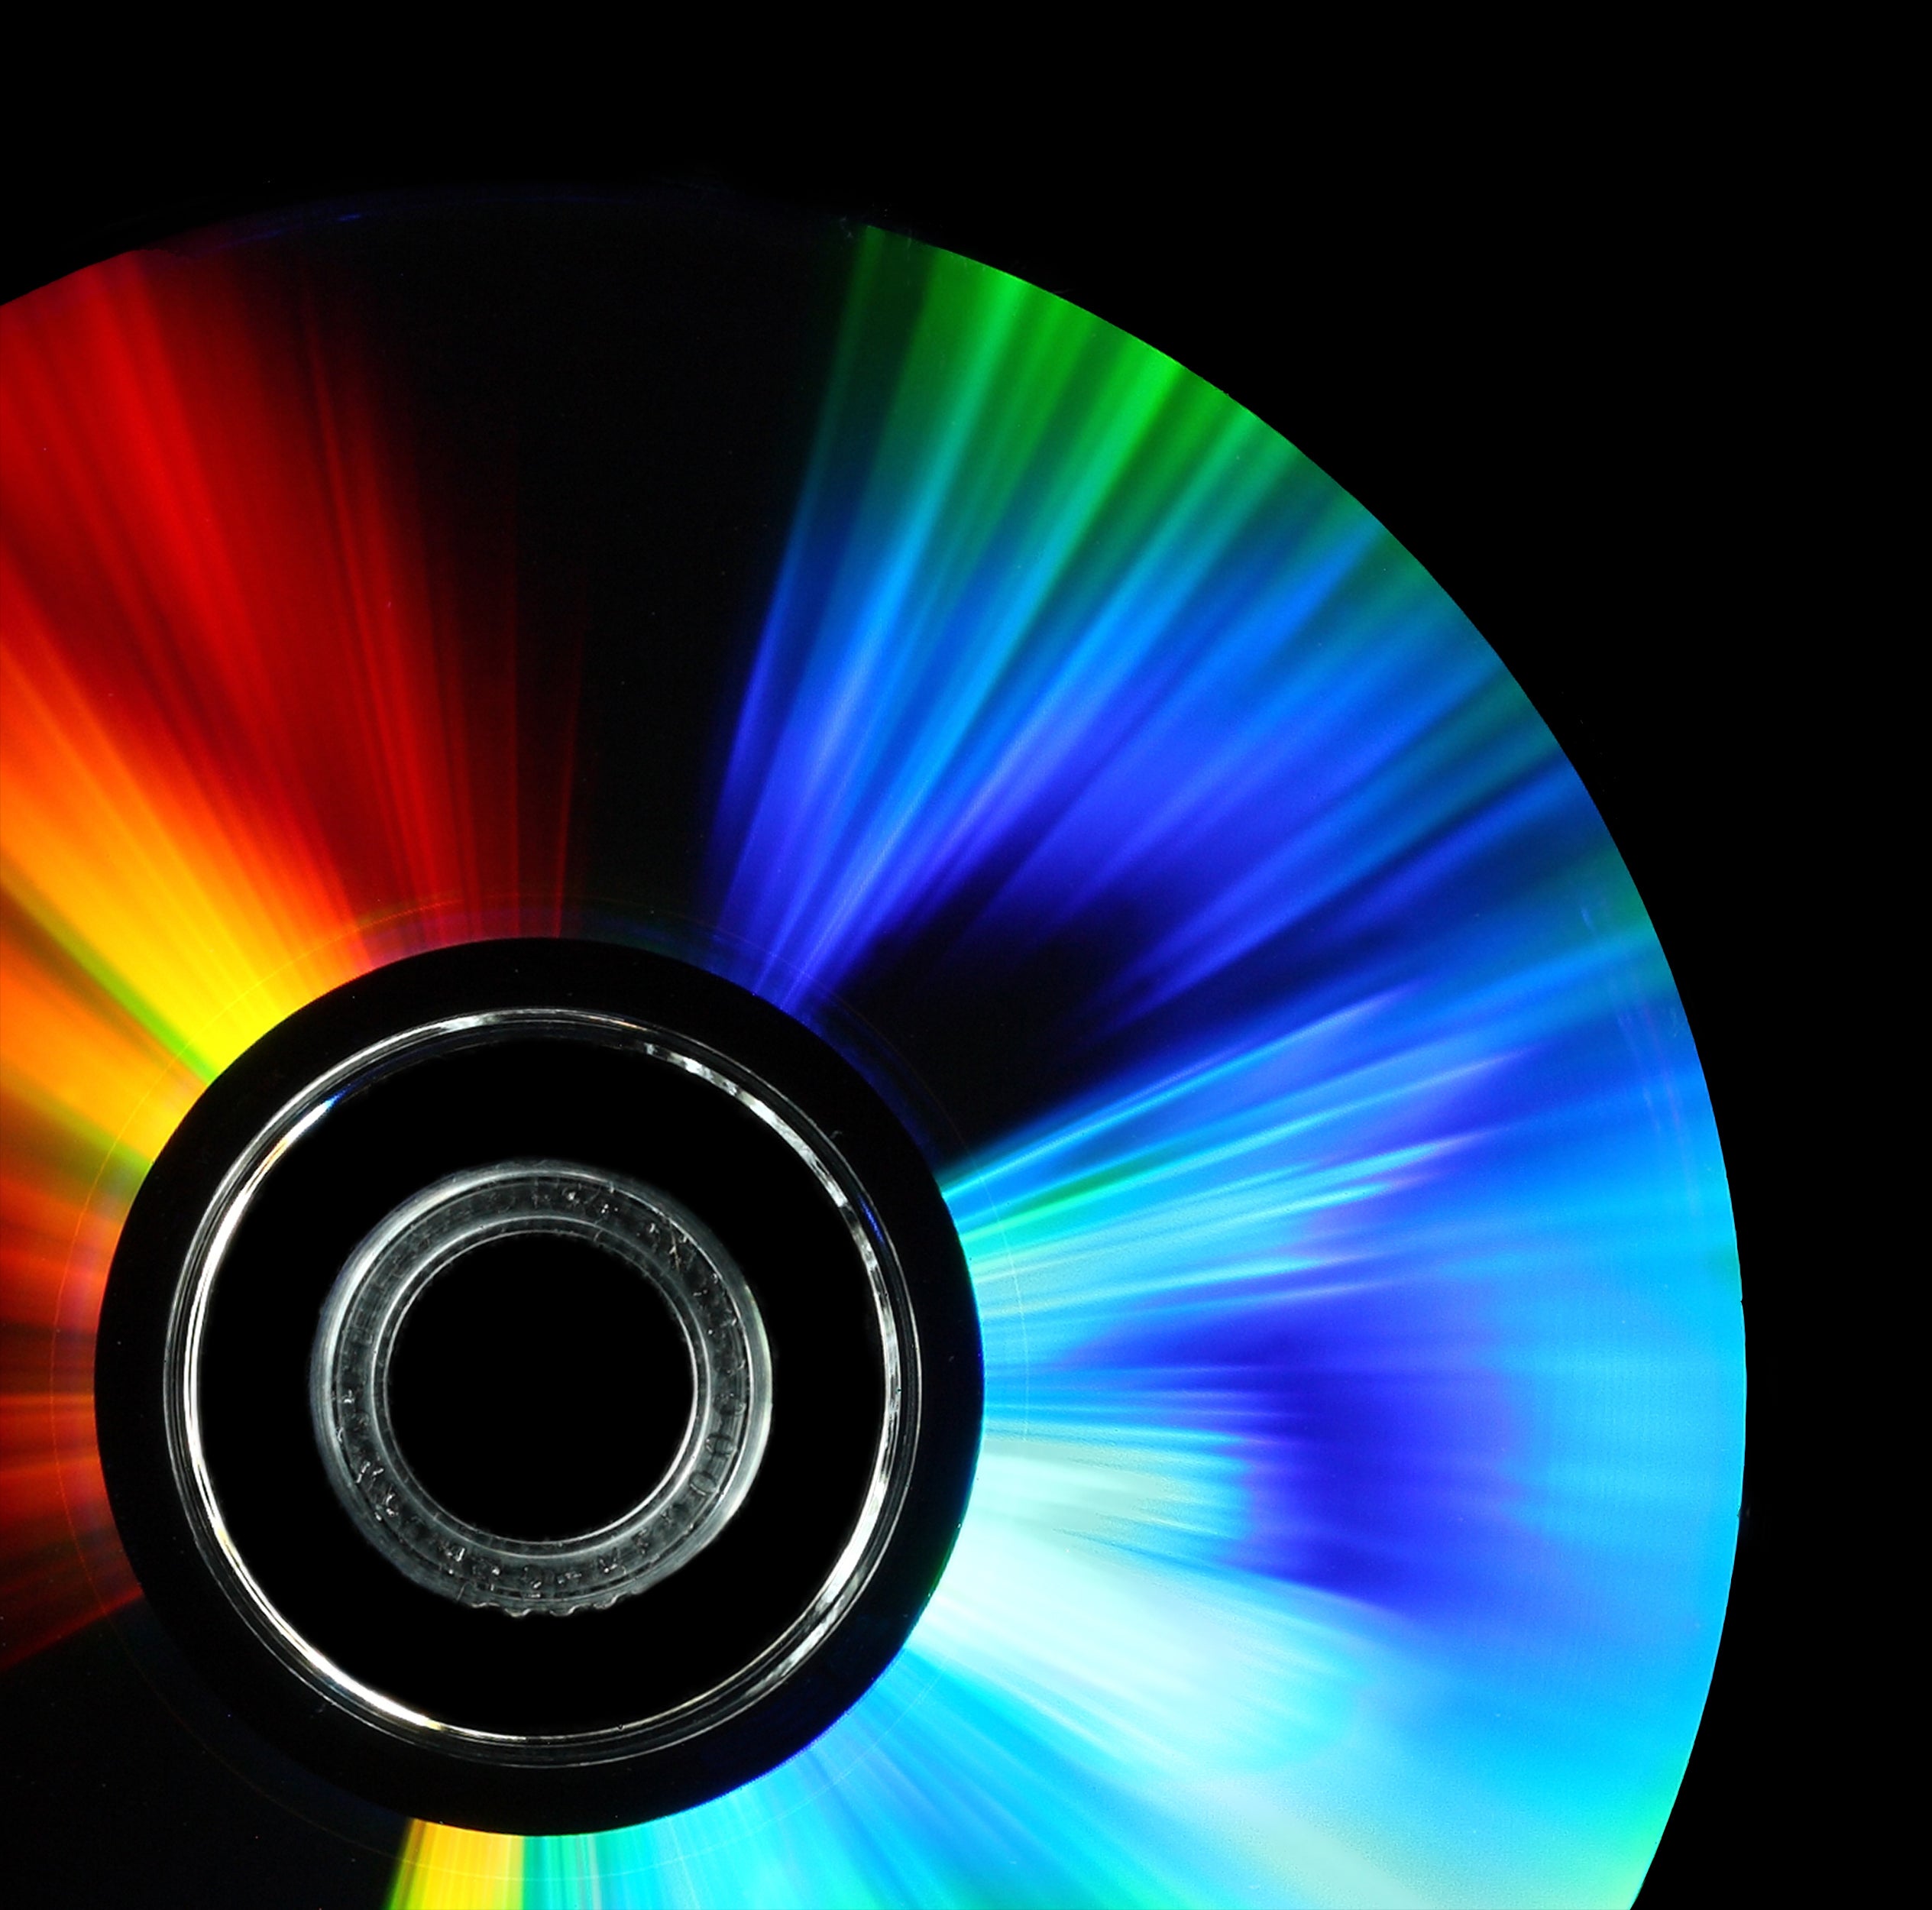 4K Blu Ray Vs. Streaming Movies: Are Discs Still Relevant Today?